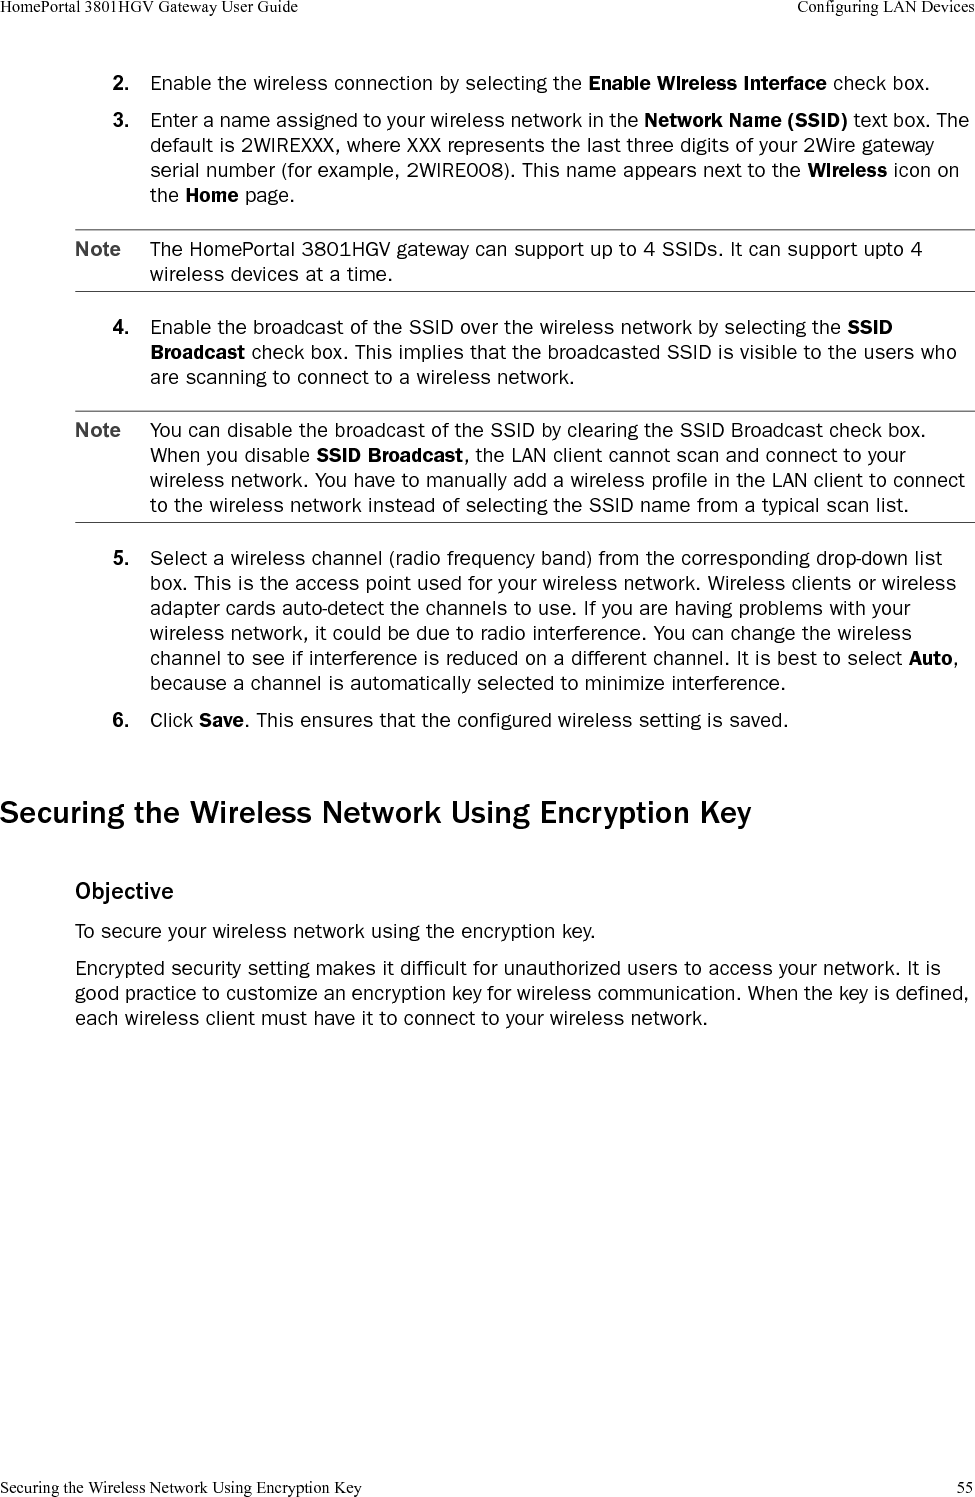 Securing the Wireless Network Using Encryption Key 55HomePortal 3801HGV Gateway User Guide Configuring LAN Devices2. Enable the wireless connection by selecting the Enable Wireless Interface check box. 3. Enter a name assigned to your wireless network in the Network Name (SSID) text box. The default is 2WIREXXX, where XXX represents the last three digits of your 2Wire gateway serial number (for example, 2WIRE008). This name appears next to the Wireless icon on the Home page.Note The HomePortal 3801HGV gateway can support up to 4 SSIDs. It can support upto 4 wireless devices at a time.4. Enable the broadcast of the SSID over the wireless network by selecting the SSID Broadcast check box. This implies that the broadcasted SSID is visible to the users who are scanning to connect to a wireless network.Note You can disable the broadcast of the SSID by clearing the SSID Broadcast check box.When you disable SSID Broadcast, the LAN client cannot scan and connect to your wireless network. You have to manually add a wireless profile in the LAN client to connect to the wireless network instead of selecting the SSID name from a typical scan list.5. Select a wireless channel (radio frequency band) from the corresponding drop-down list box. This is the access point used for your wireless network. Wireless clients or wireless adapter cards auto-detect the channels to use. If you are having problems with your wireless network, it could be due to radio interference. You can change the wireless channel to see if interference is reduced on a different channel. It is best to select Auto, because a channel is automatically selected to minimize interference.6. Click Save. This ensures that the configured wireless setting is saved.Securing the Wireless Network Using Encryption KeyObjectiveTo secure your wireless network using the encryption key. Encrypted security setting makes it difficult for unauthorized users to access your network. It is good practice to customize an encryption key for wireless communication. When the key is defined, each wireless client must have it to connect to your wireless network.